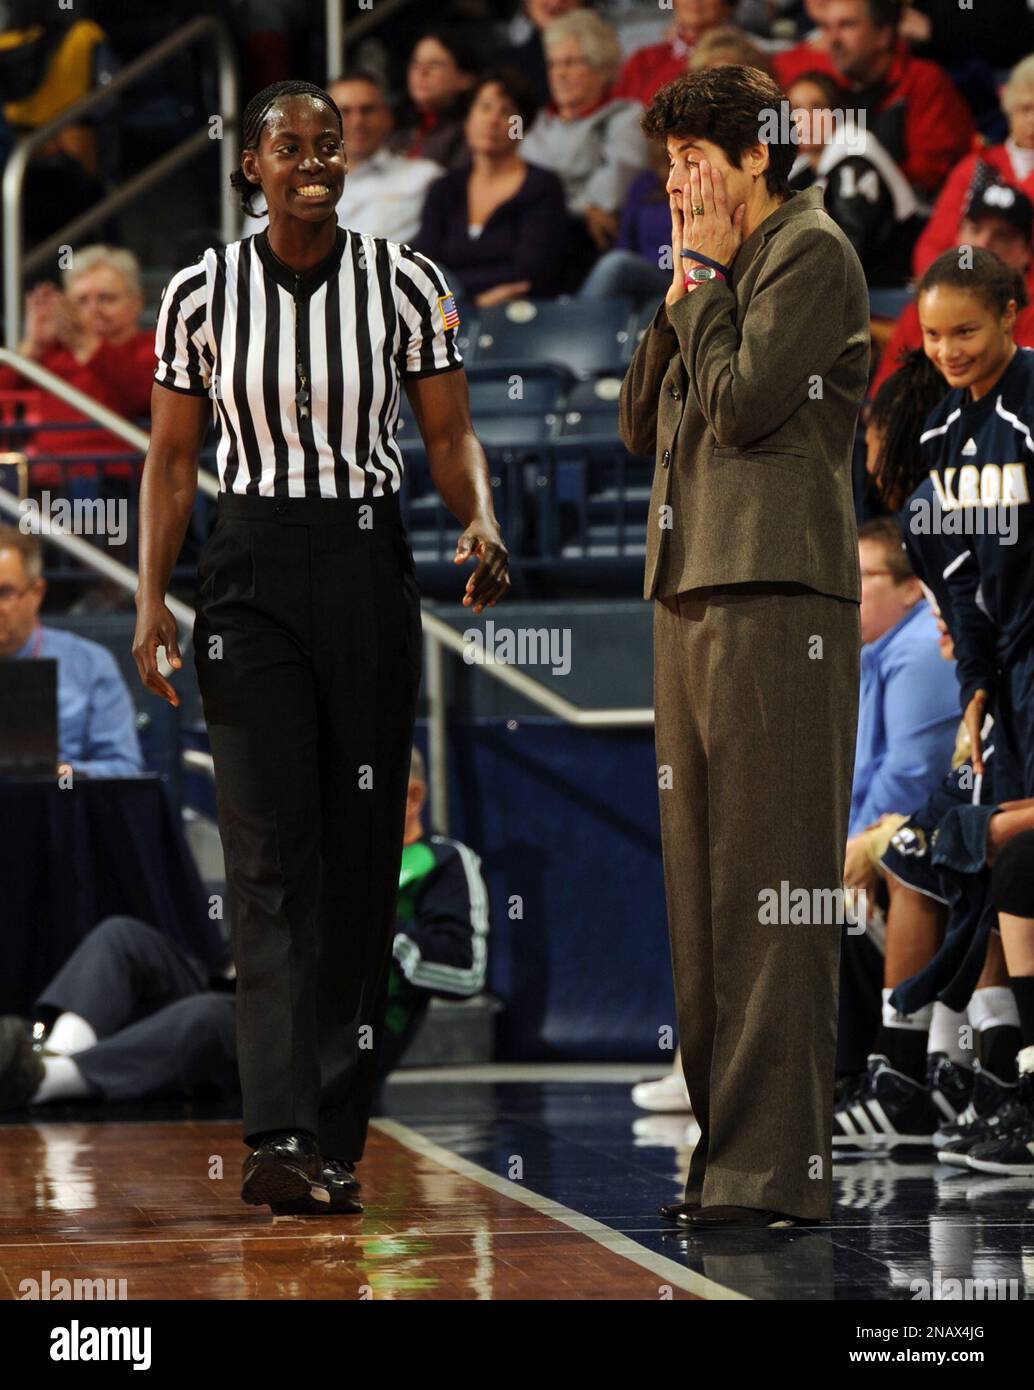 https://c8.alamy.com/comp/2NAX4JG/akron-coach-jodi-kest-right-reacts-to-a-play-as-referee-linda-miles-looks-on-during-the-second-half-of-an-ncaa-college-basketball-game-with-notre-dame-friday-nov-11-2011-in-south-bend-ind-notre-dame-won-81-61-akrons-next-scheduled-game-is-with-saint-francis-pa-on-nov-22-ap-photojoe-raymond-2NAX4JG.jpg